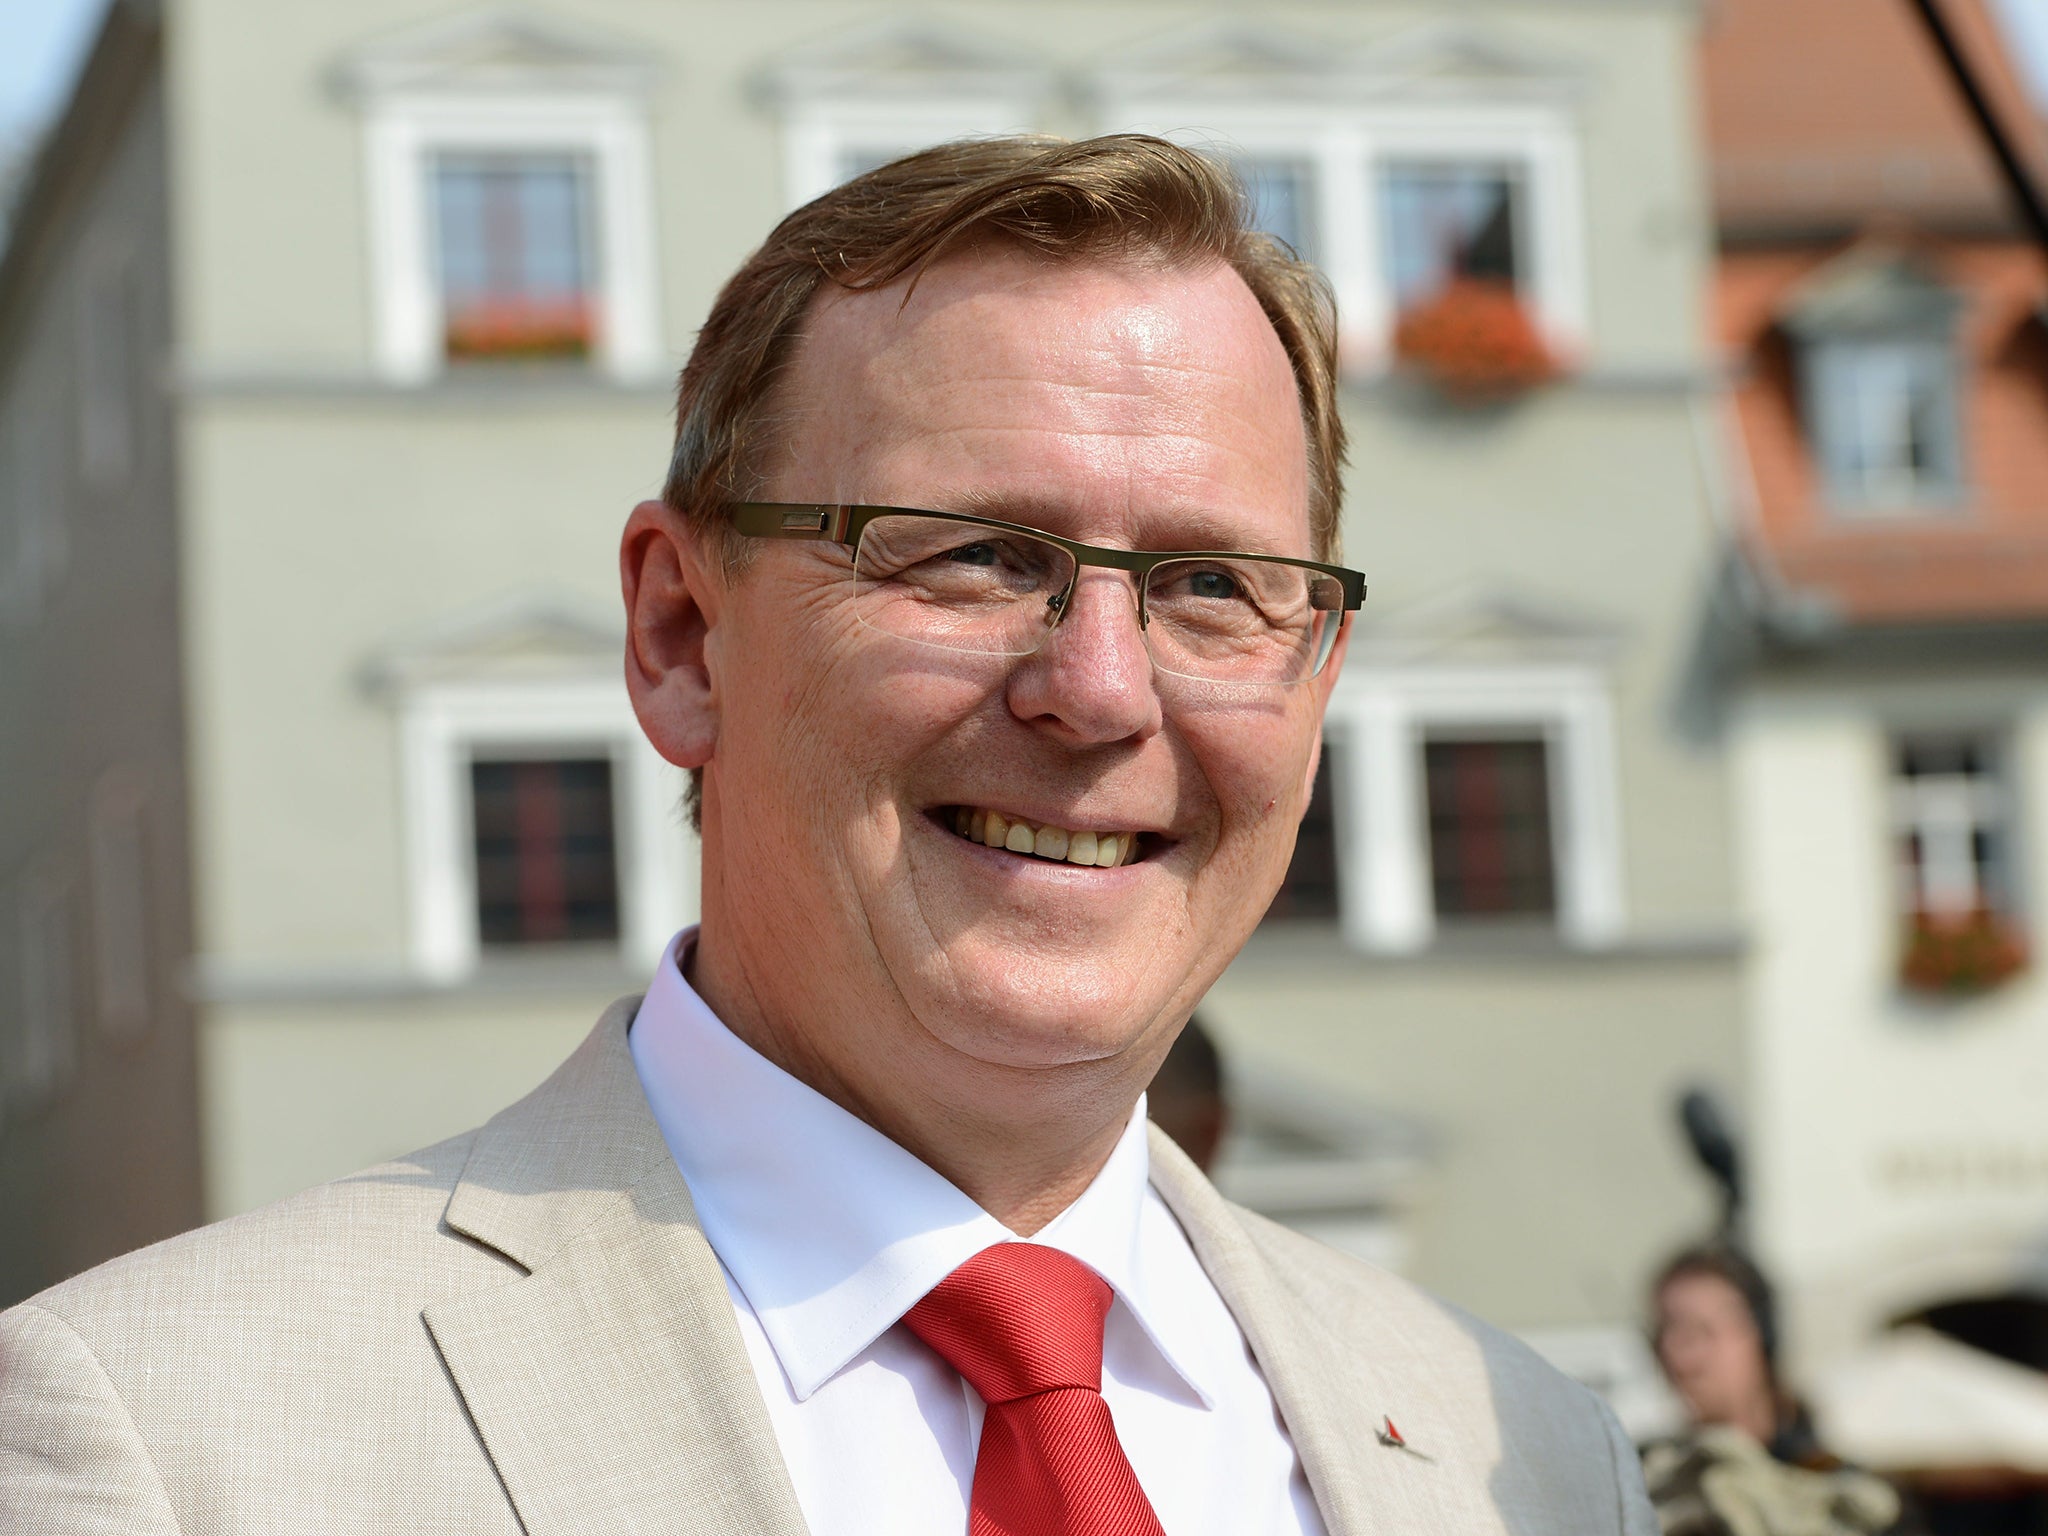 Bodo Ramelow is poised to become prime minister of Thuringia, leading a ‘red-red-green’ alliance